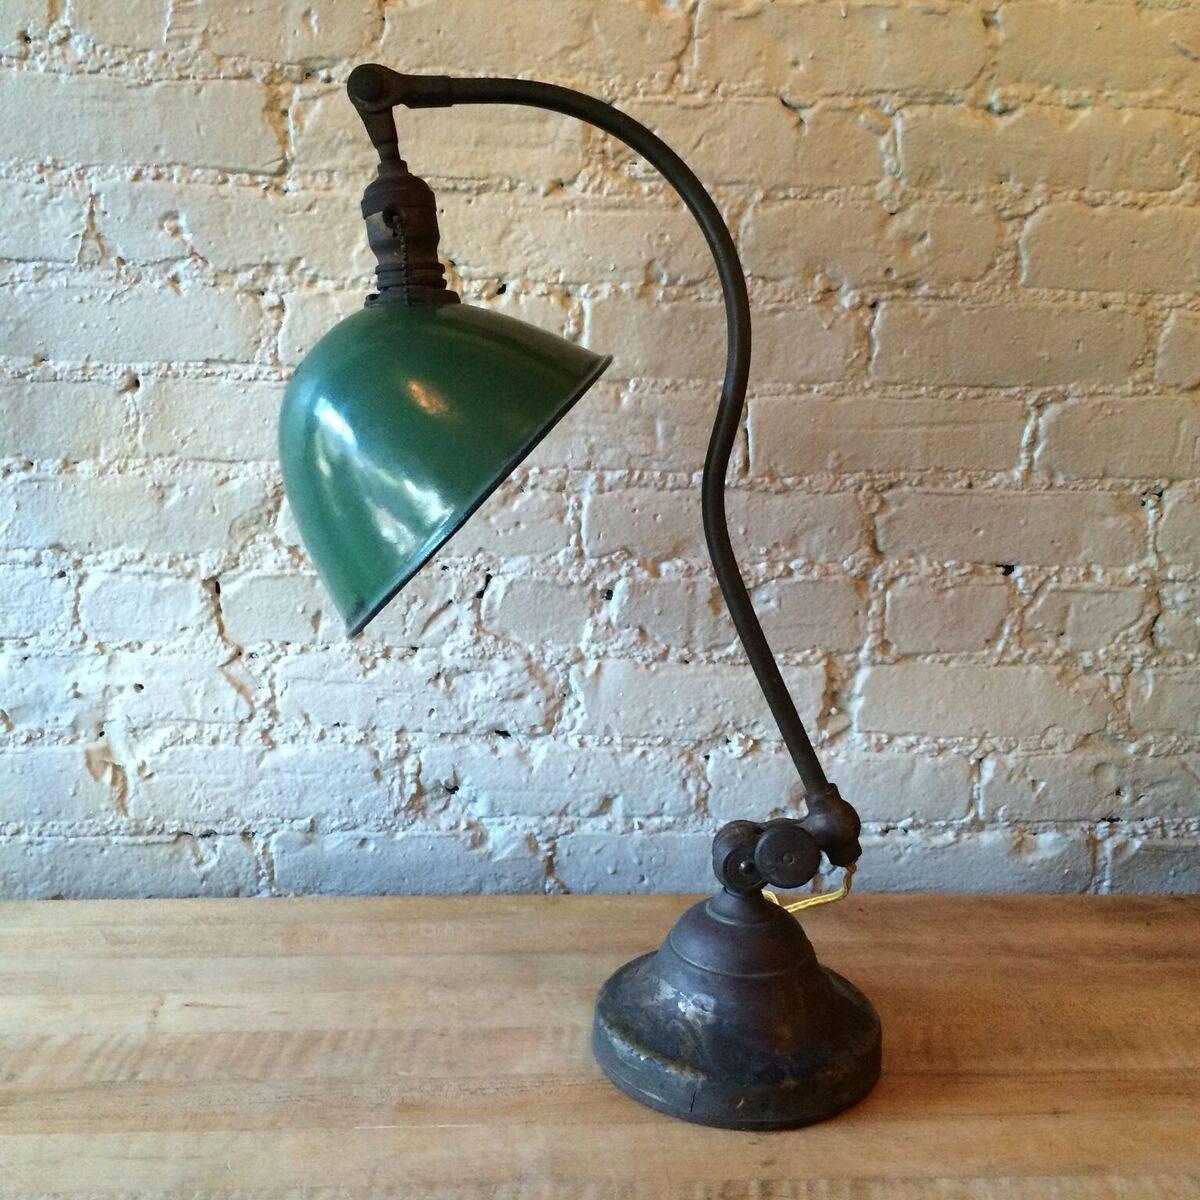 Rare, Industrial, table task lamp by O.C. White patented 1898 features a unique curved, brass arm on a weighted cast iron base and green enamel shade. The lamp pivots on three axis, is newly wired with a cloth cord and takes up to a 200 watt bulb.